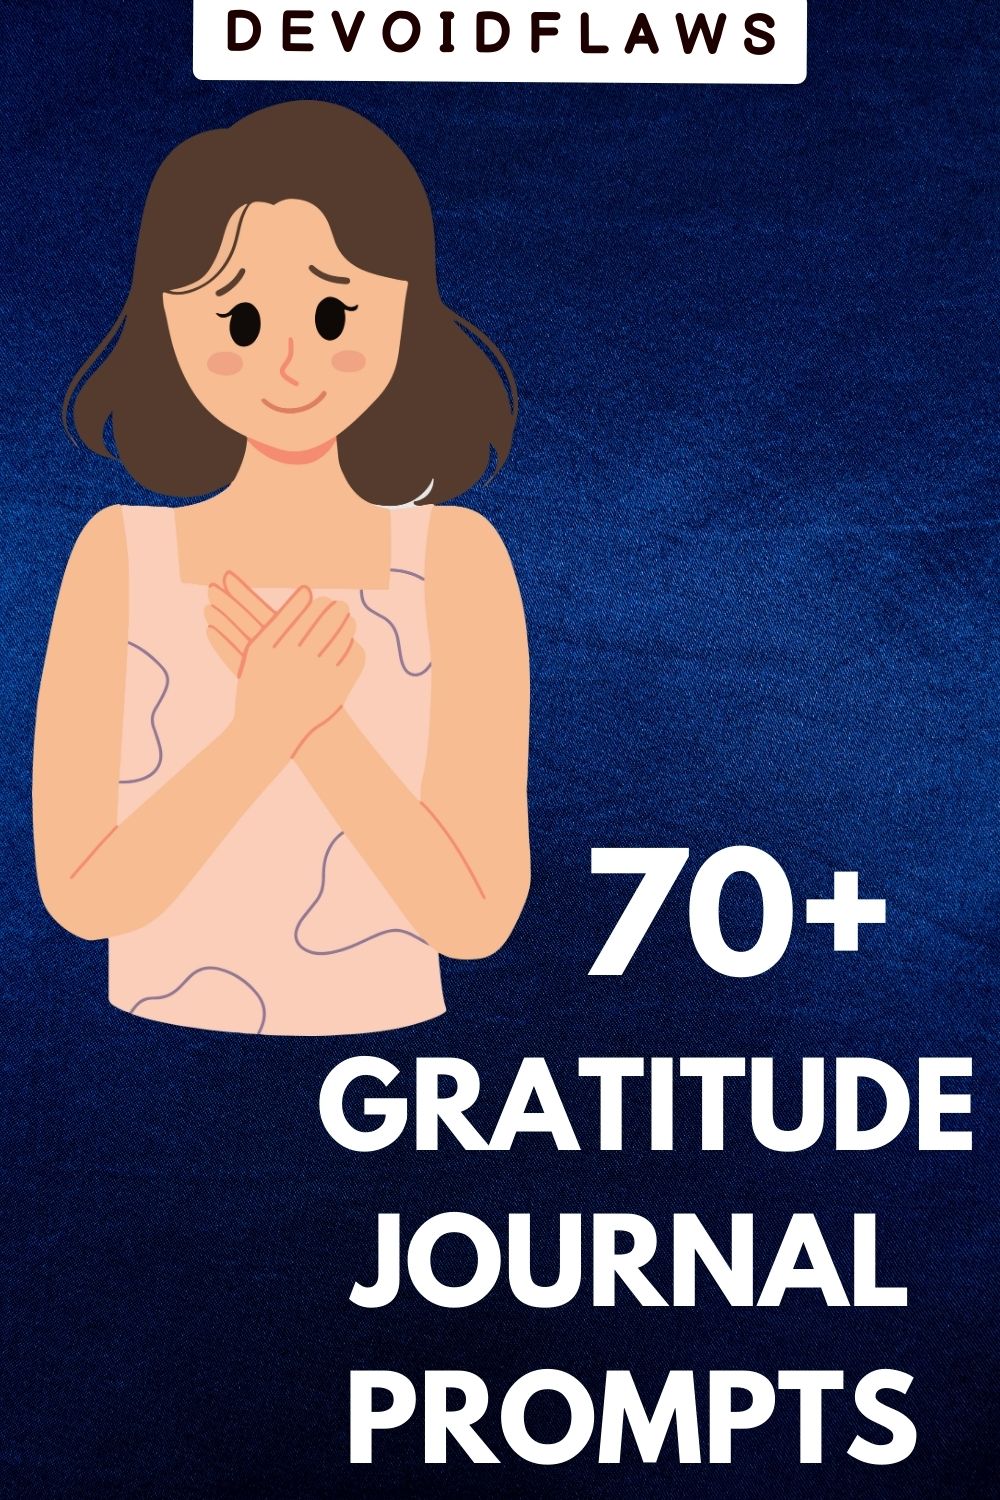 image with text 70 gratitude journal prompts